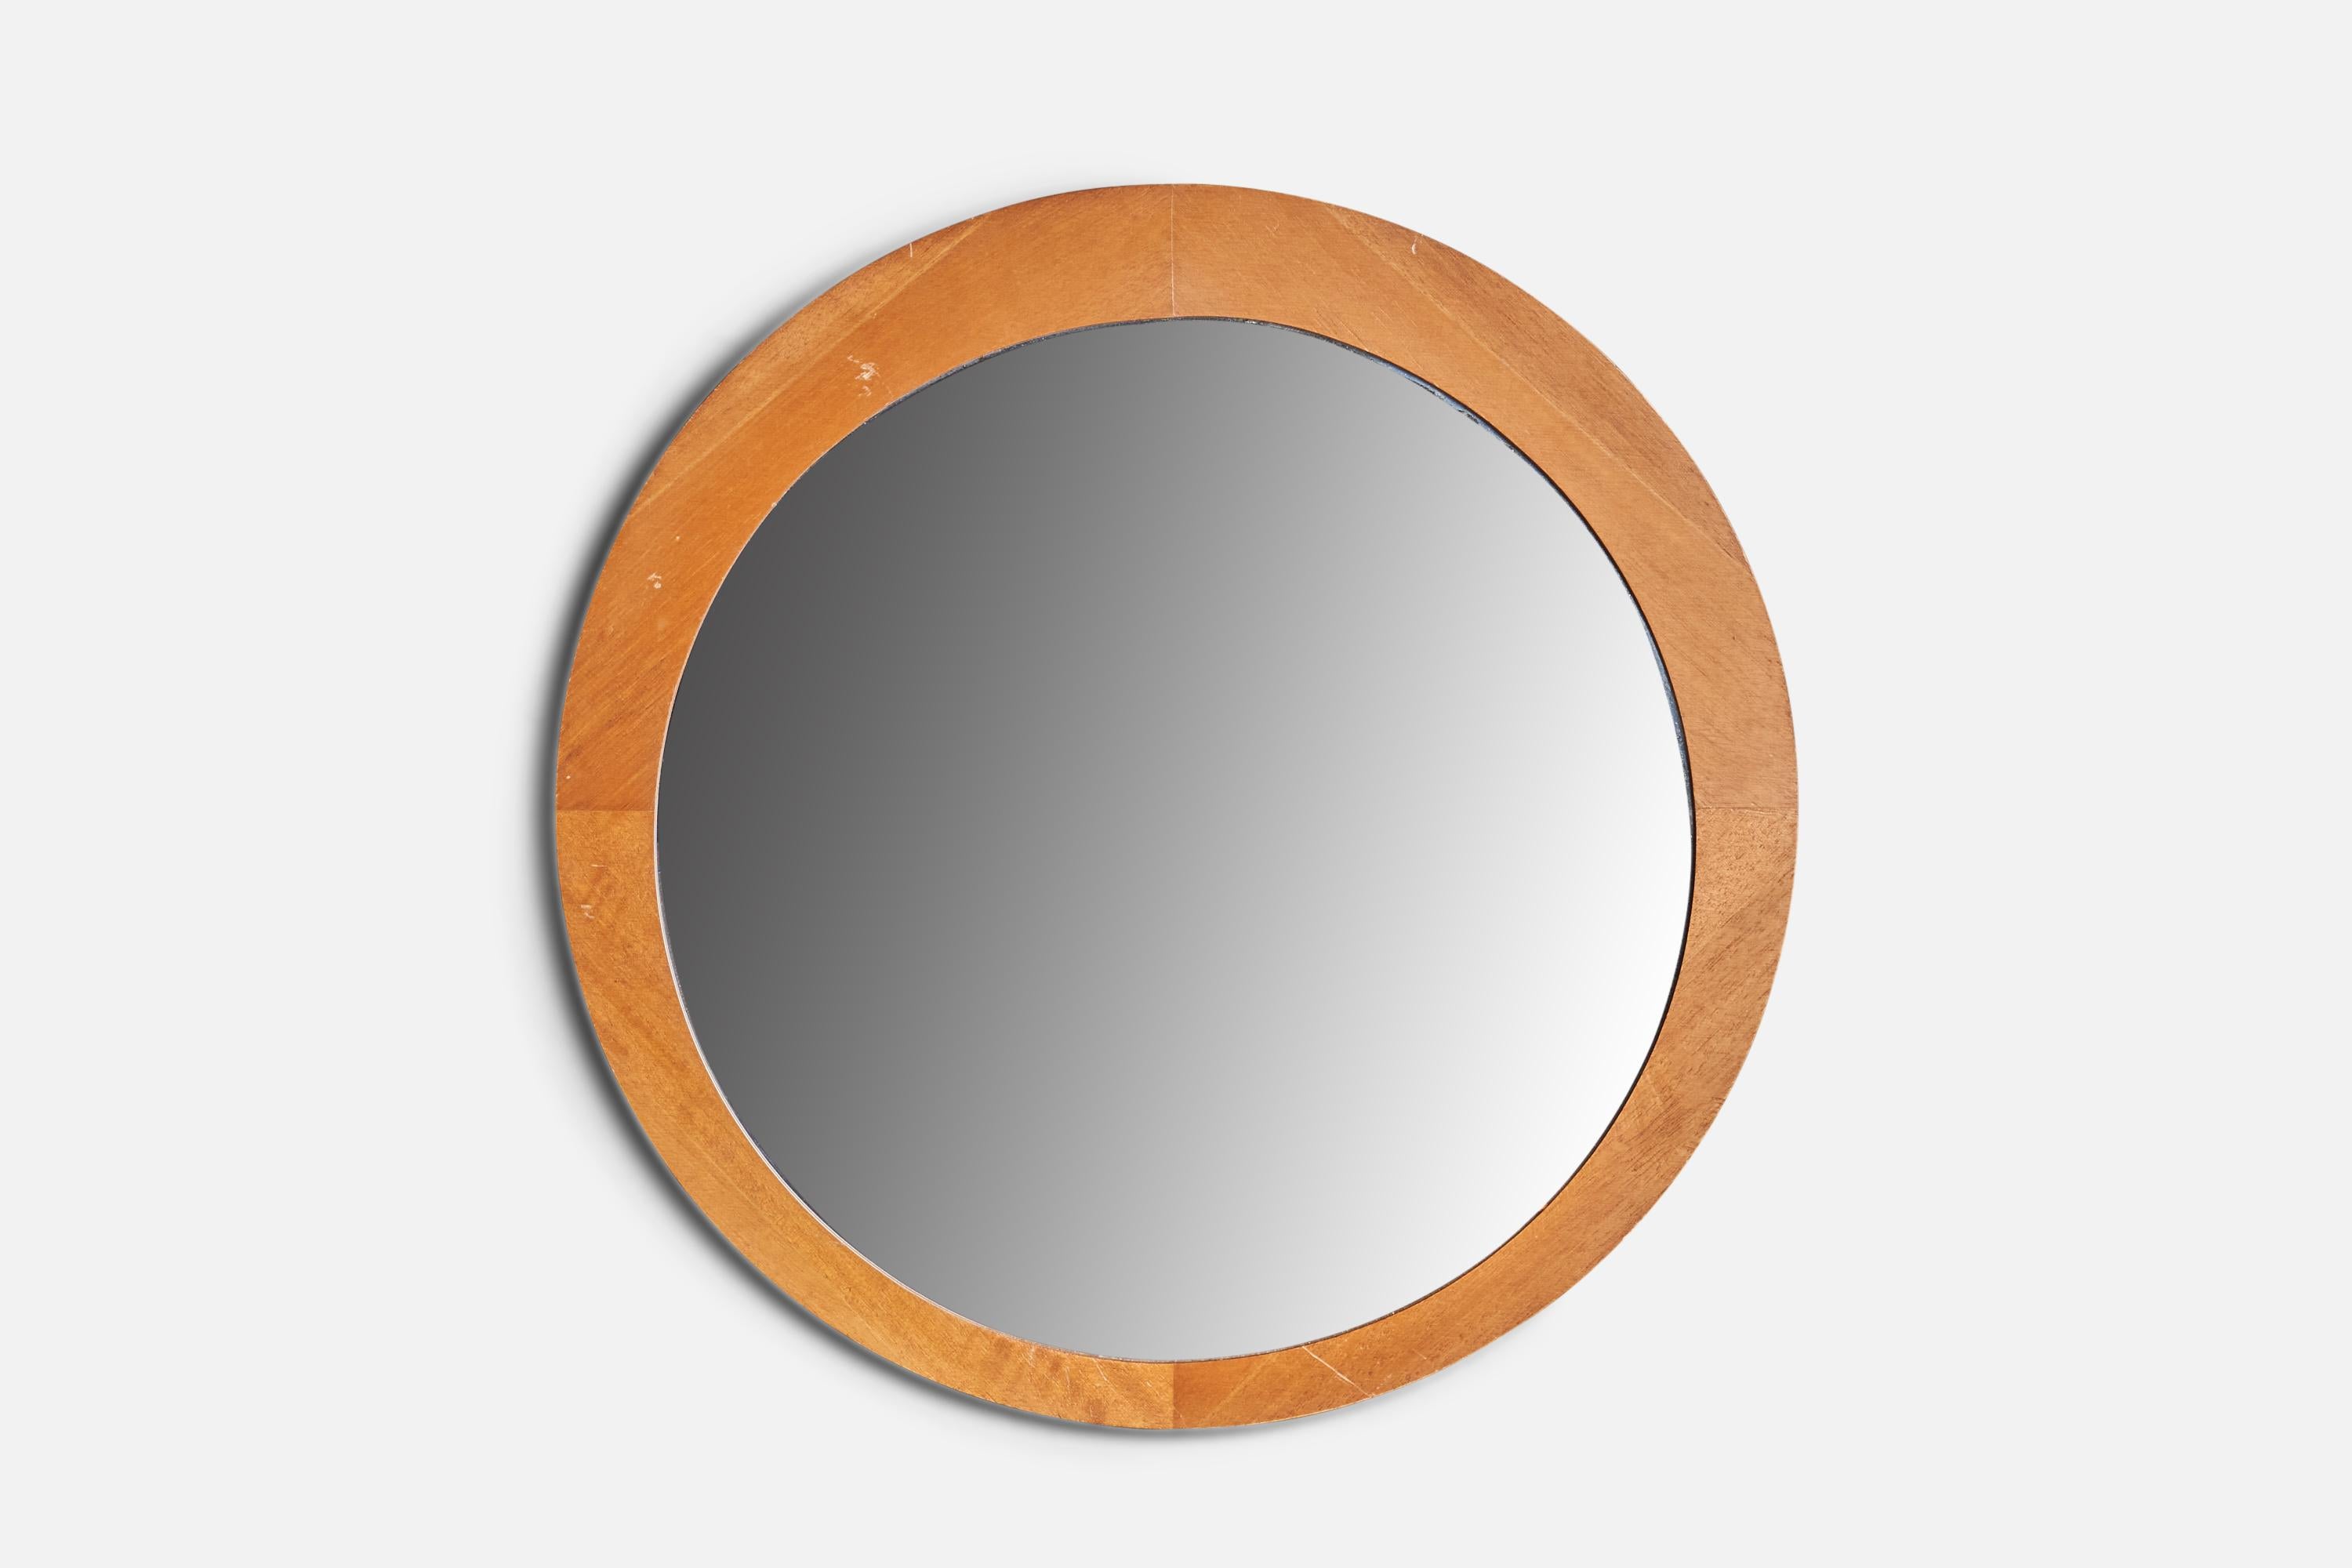 An oak wall mirror designed and produced in Sweden, 1960s.